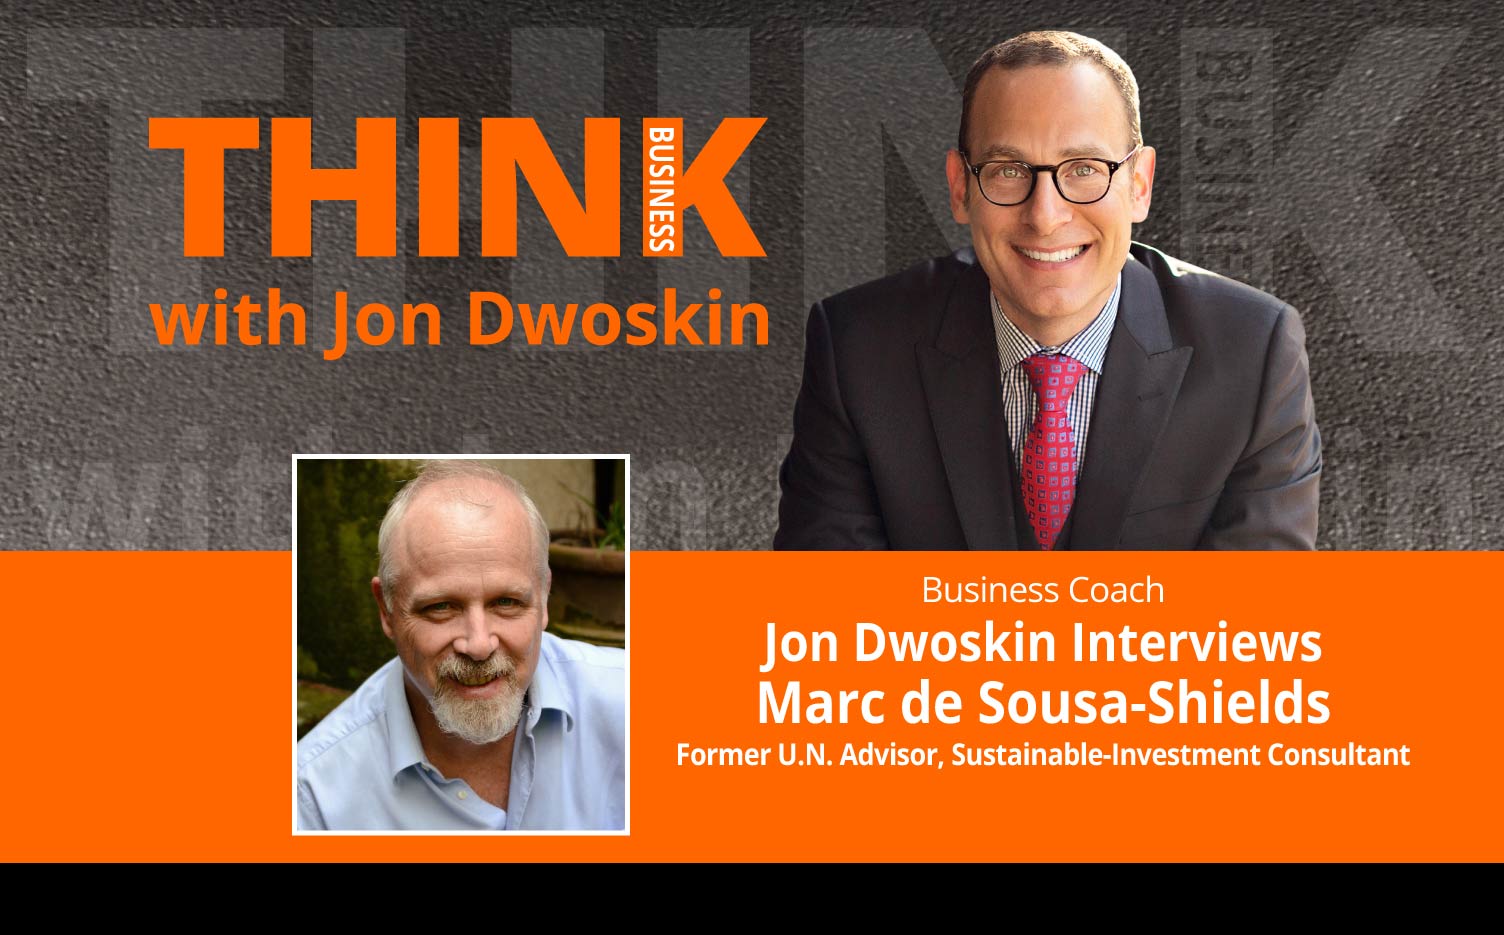 THINK Business Podcast: Jon Dwoskin Interviews Marc de Sousa-Shields, Former U.N. Advisor, Sustainable-Investment Consultant